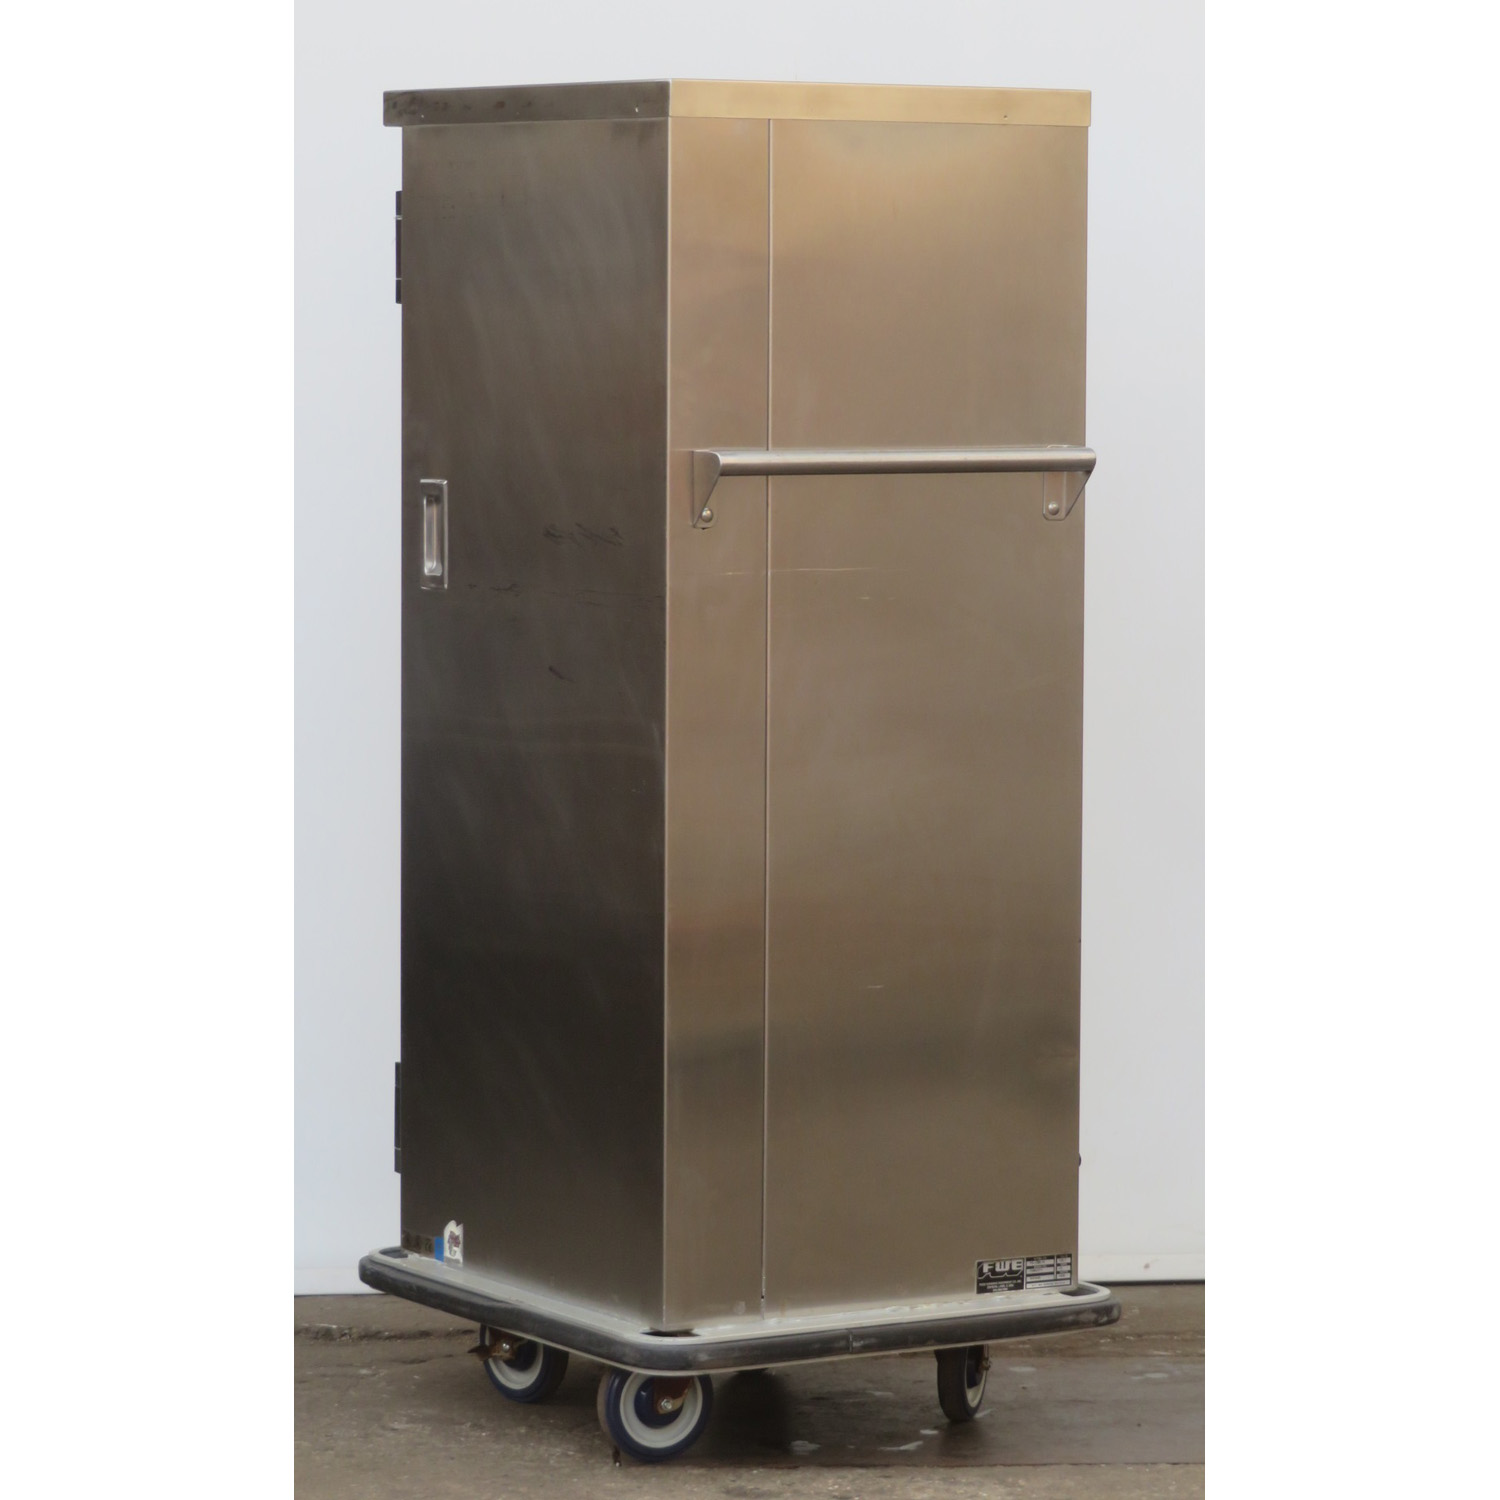 FWE PS-1220-15 Full Height Insulated Mobile Heated Cabinet, Used Excellent Condition image 3